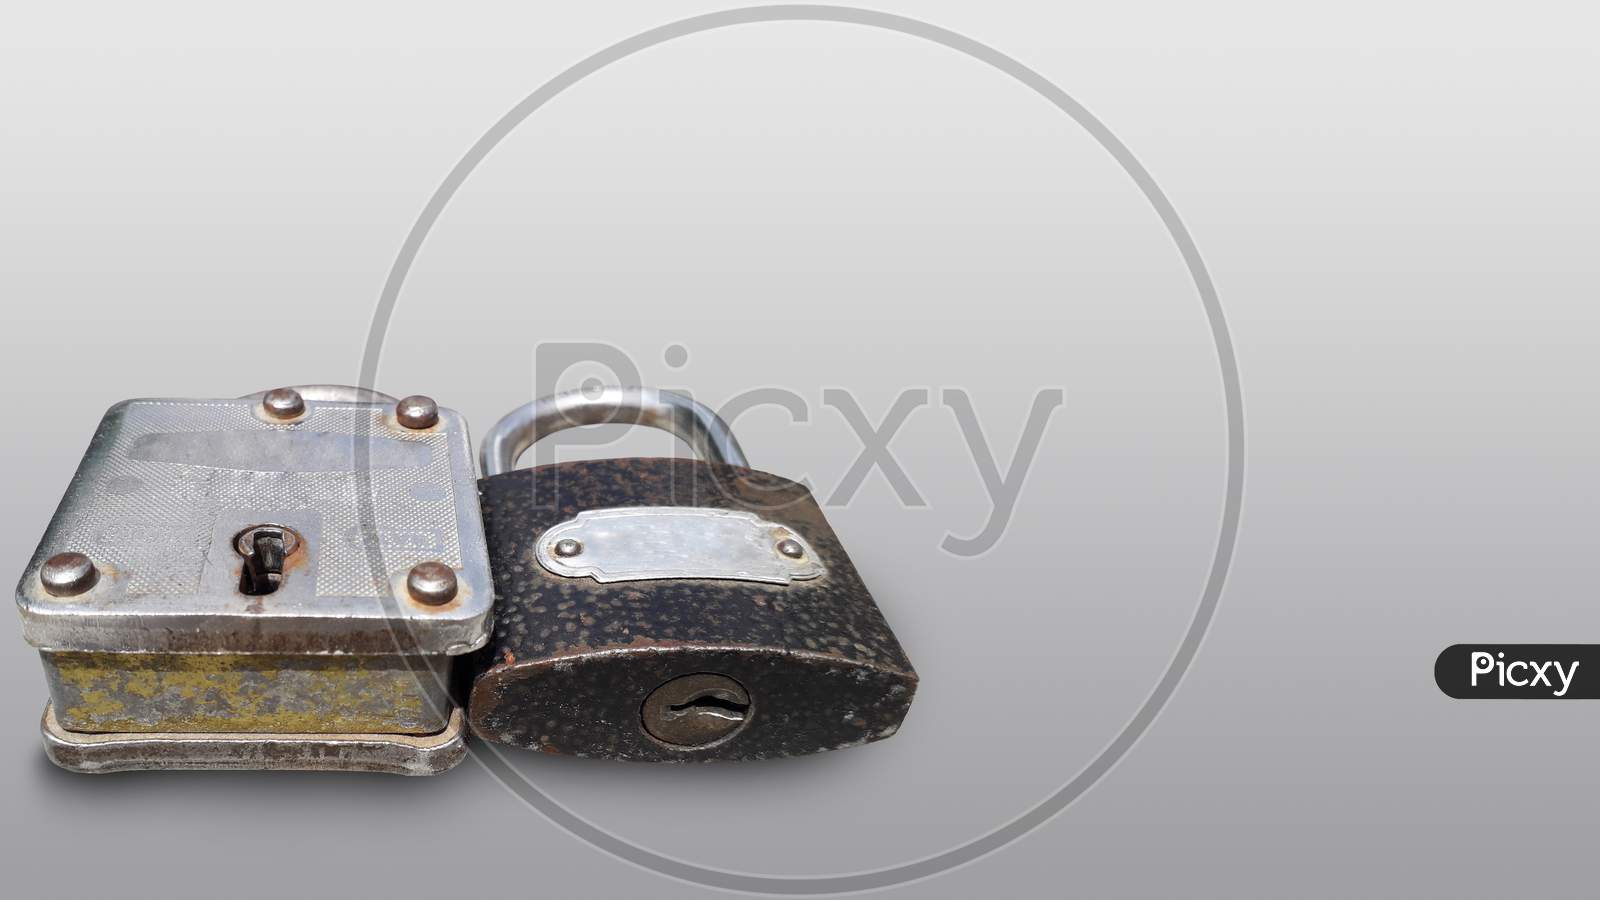 Iron pad lock for security purposes  isolated photo